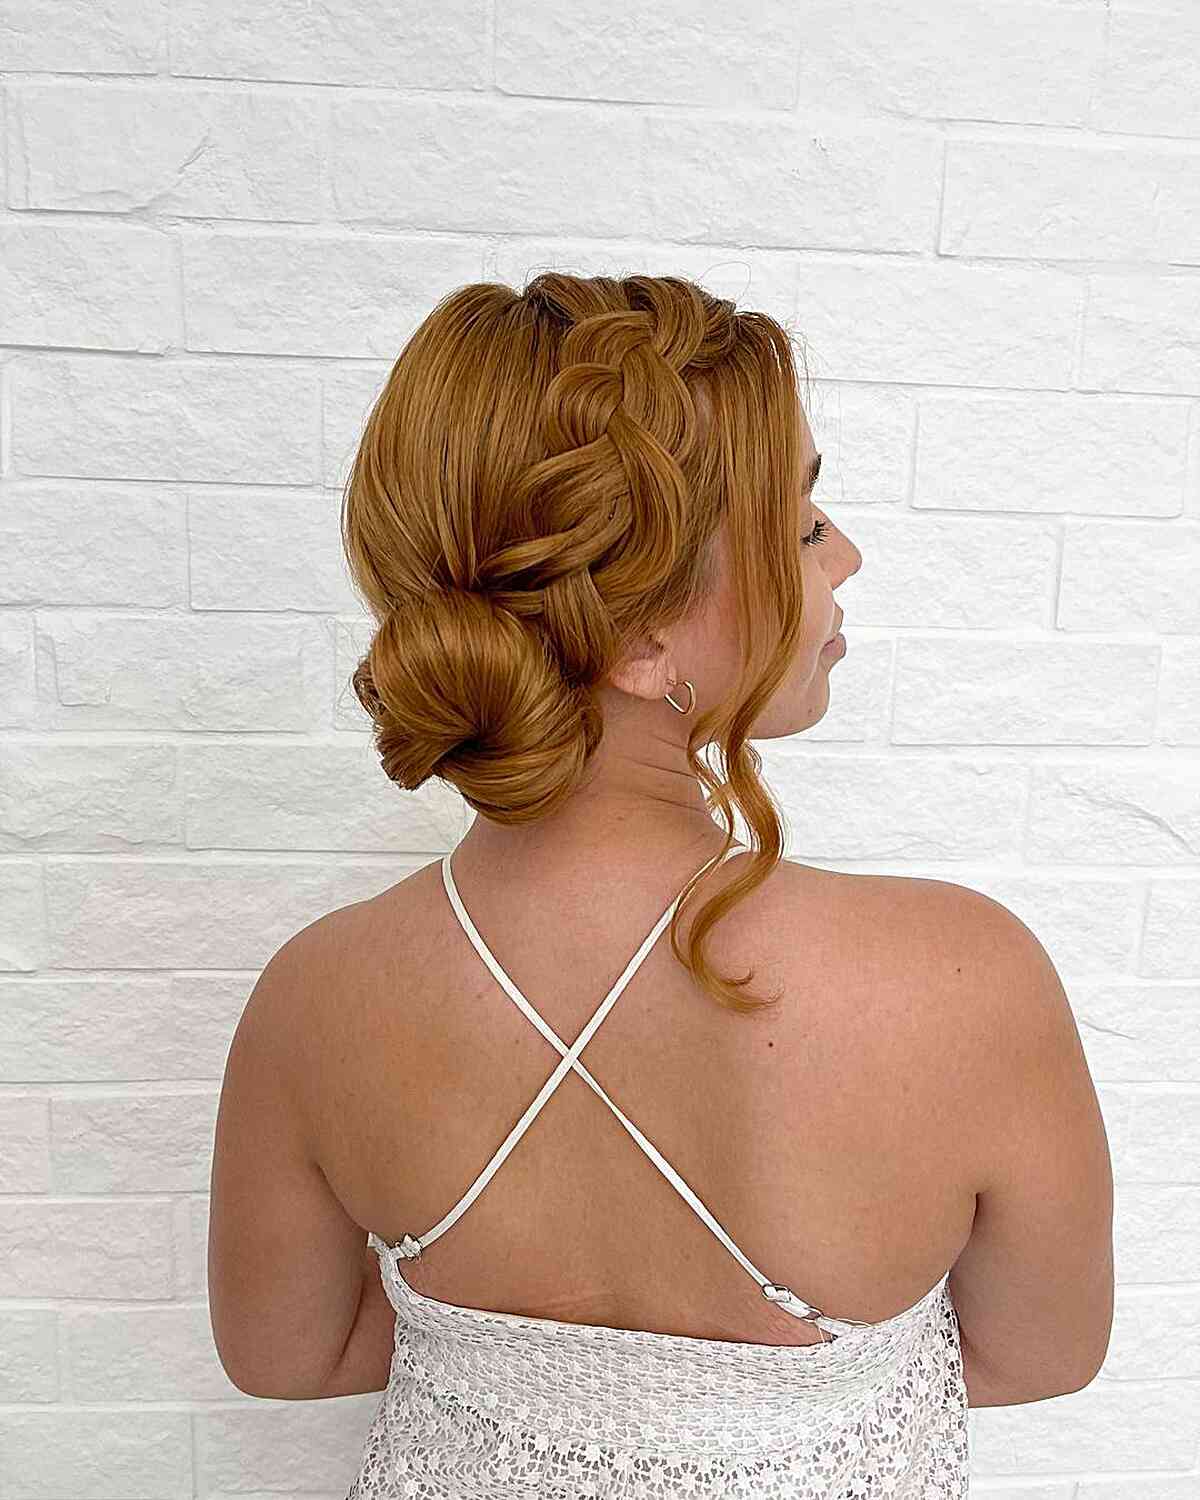 Simple Updo Side Bun and Big Braid for Long Hair